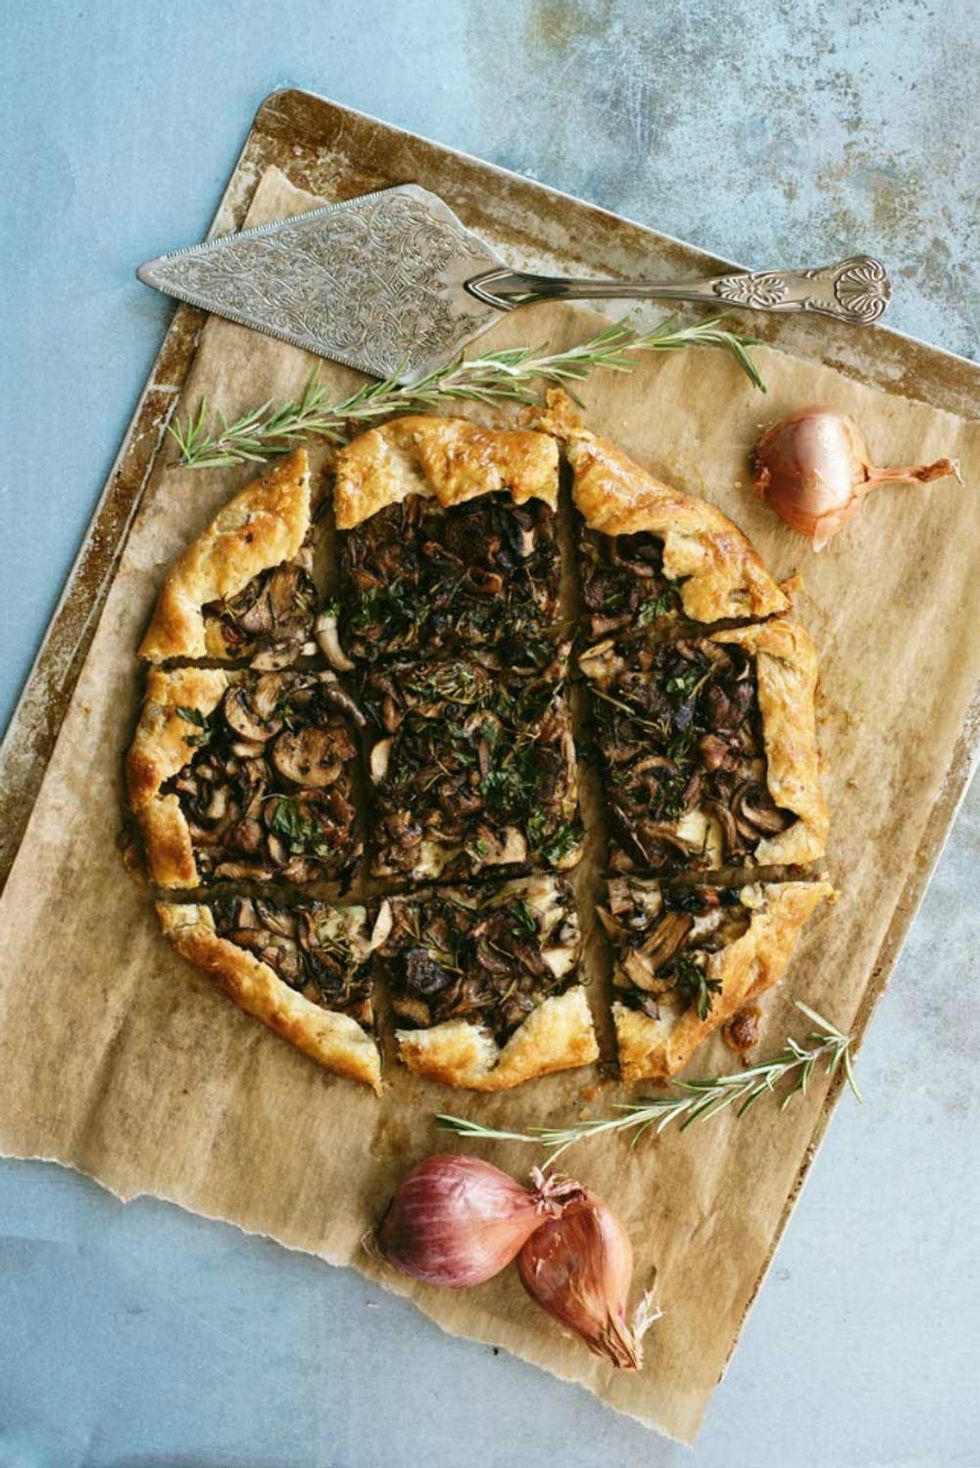 brown and green Savory Mushroom Tart Recipe With Shallots & Rosemary galette recipe